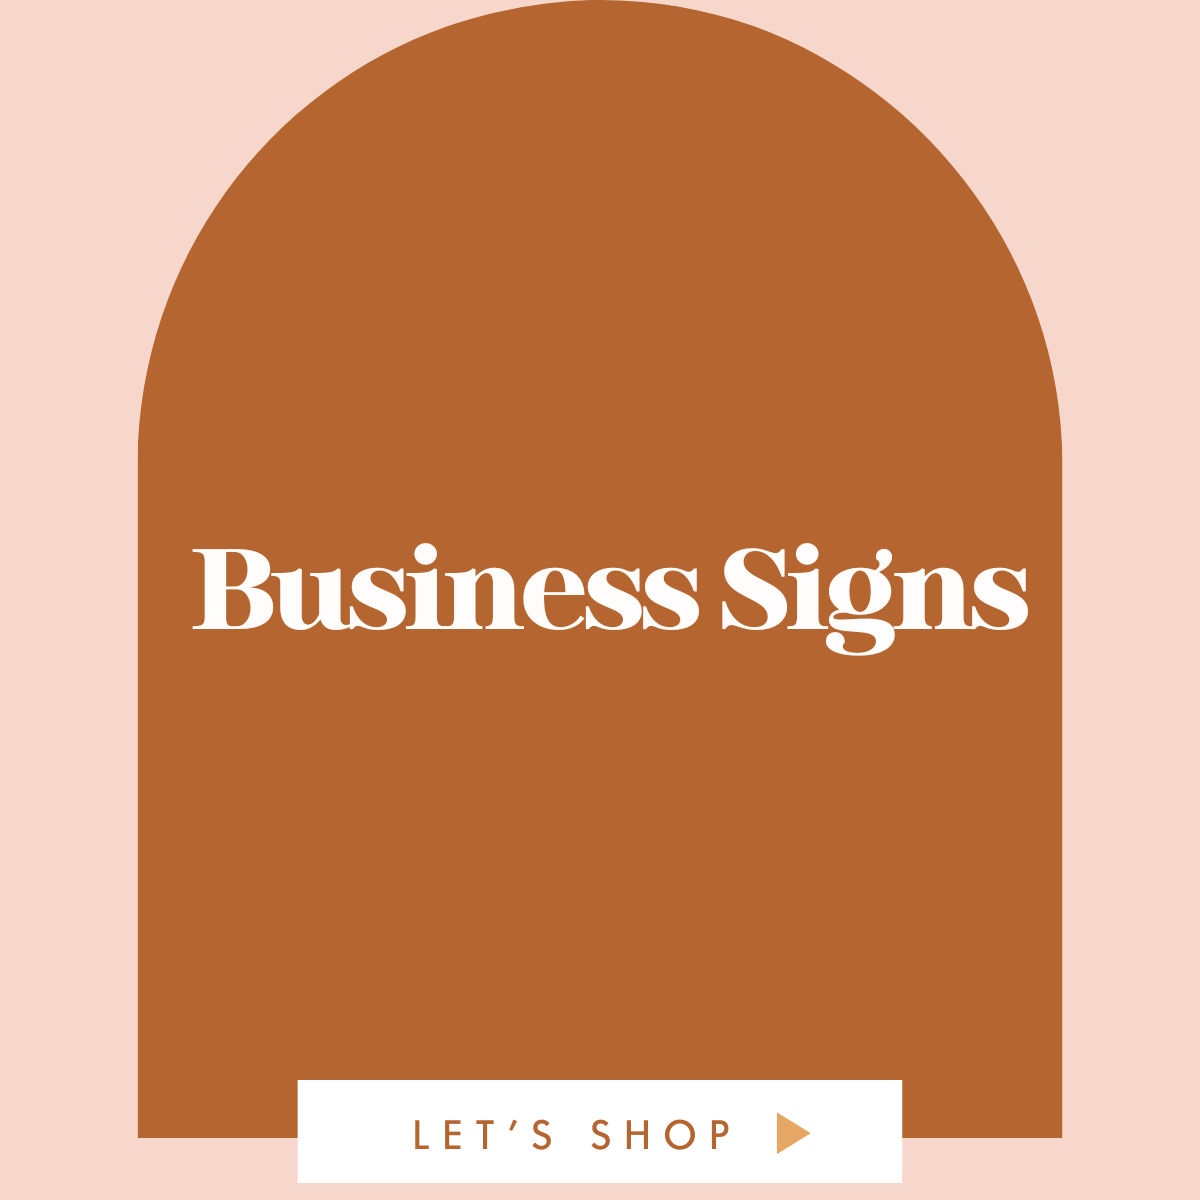 Business Signs